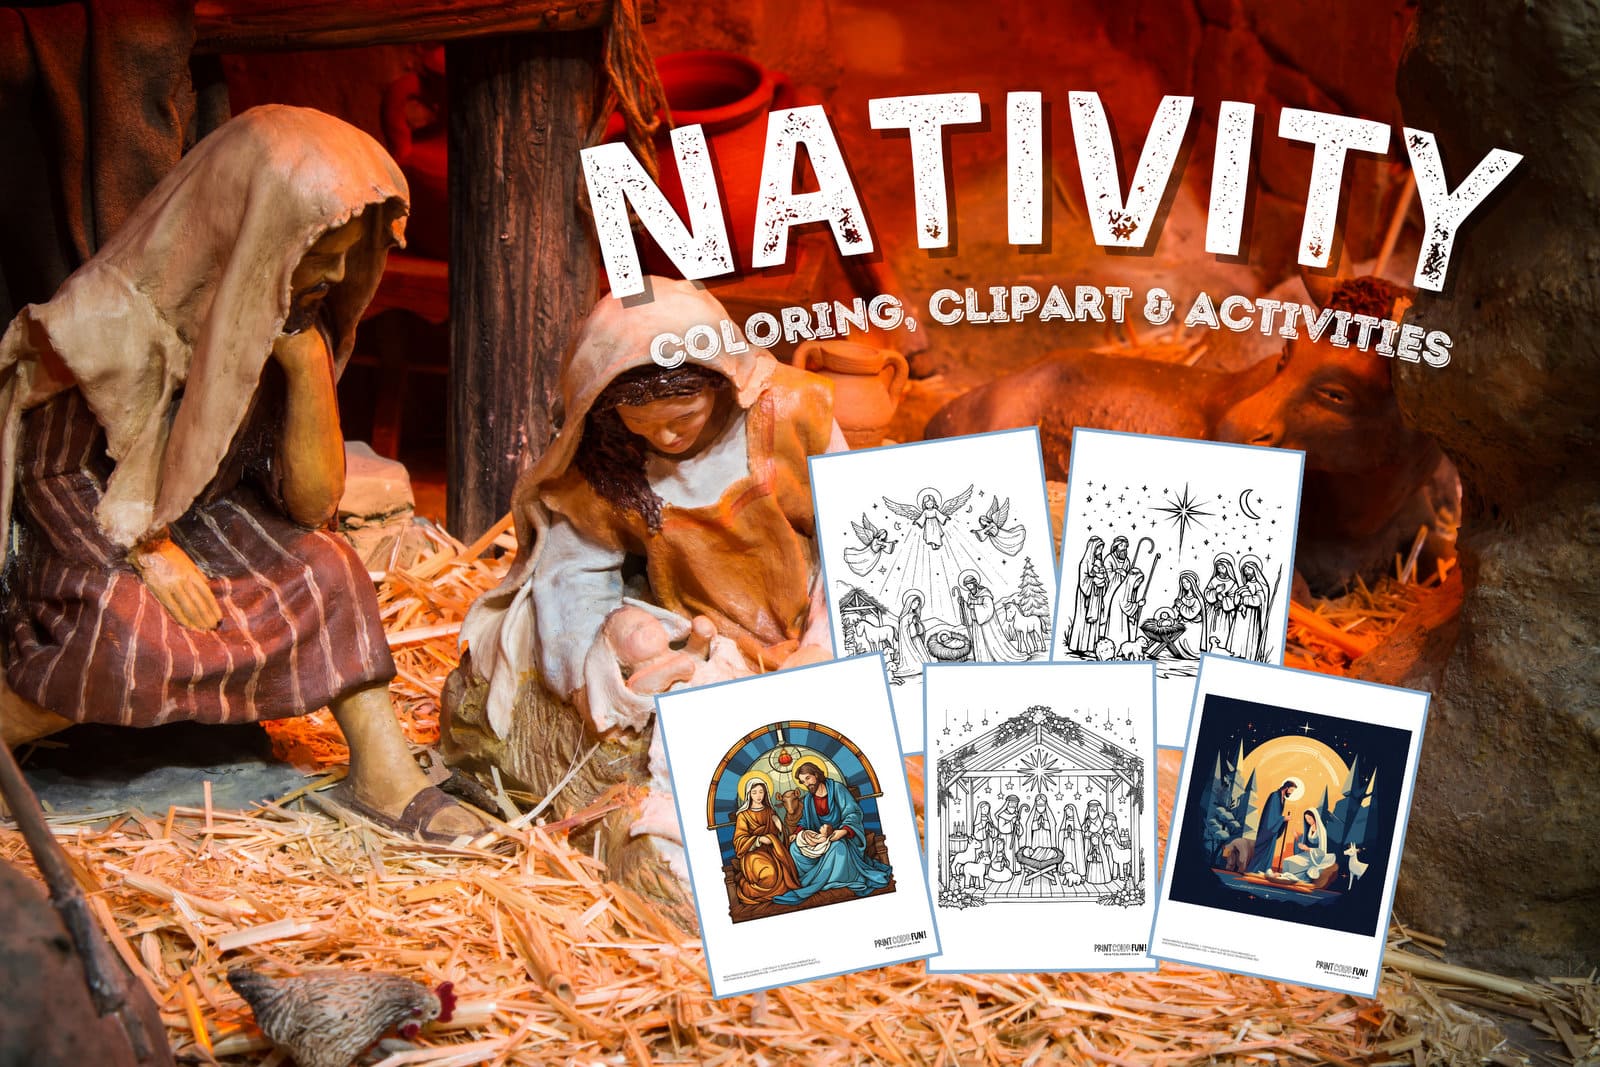 Nativity scene coloring pages and clipart for Christmas from PrintColorFun com